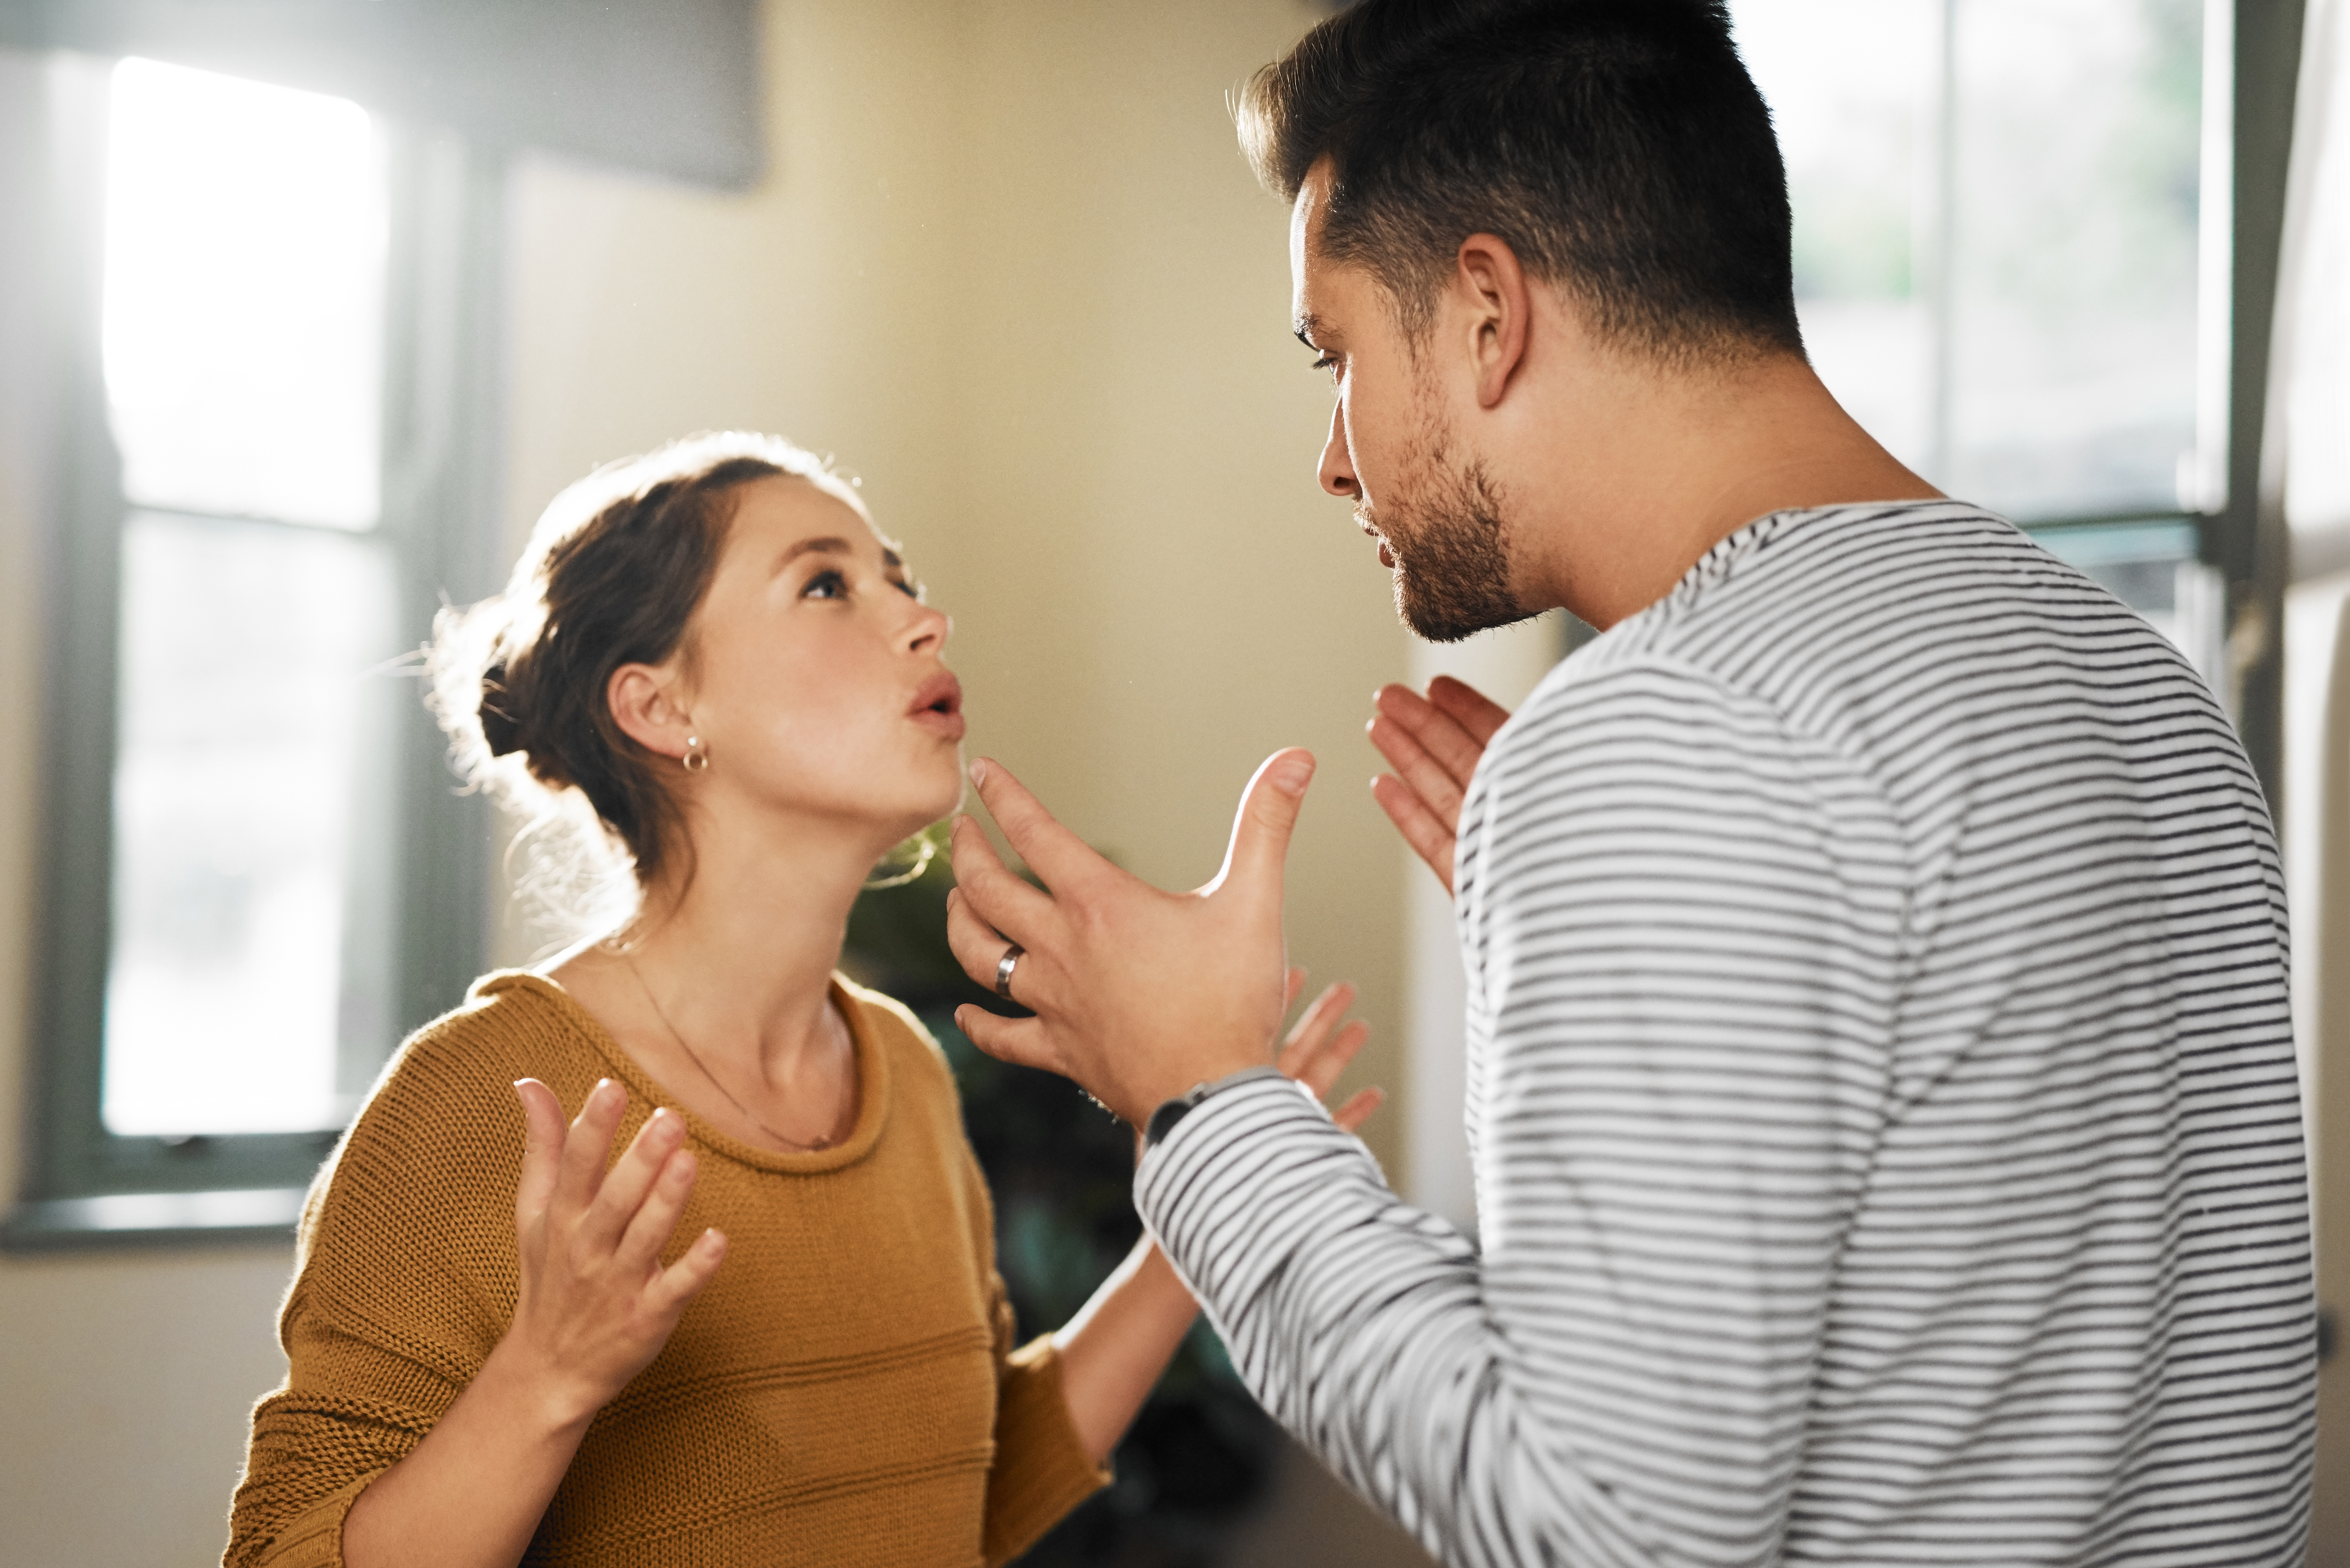 A young couple having an argument at home | Source: Getty Images